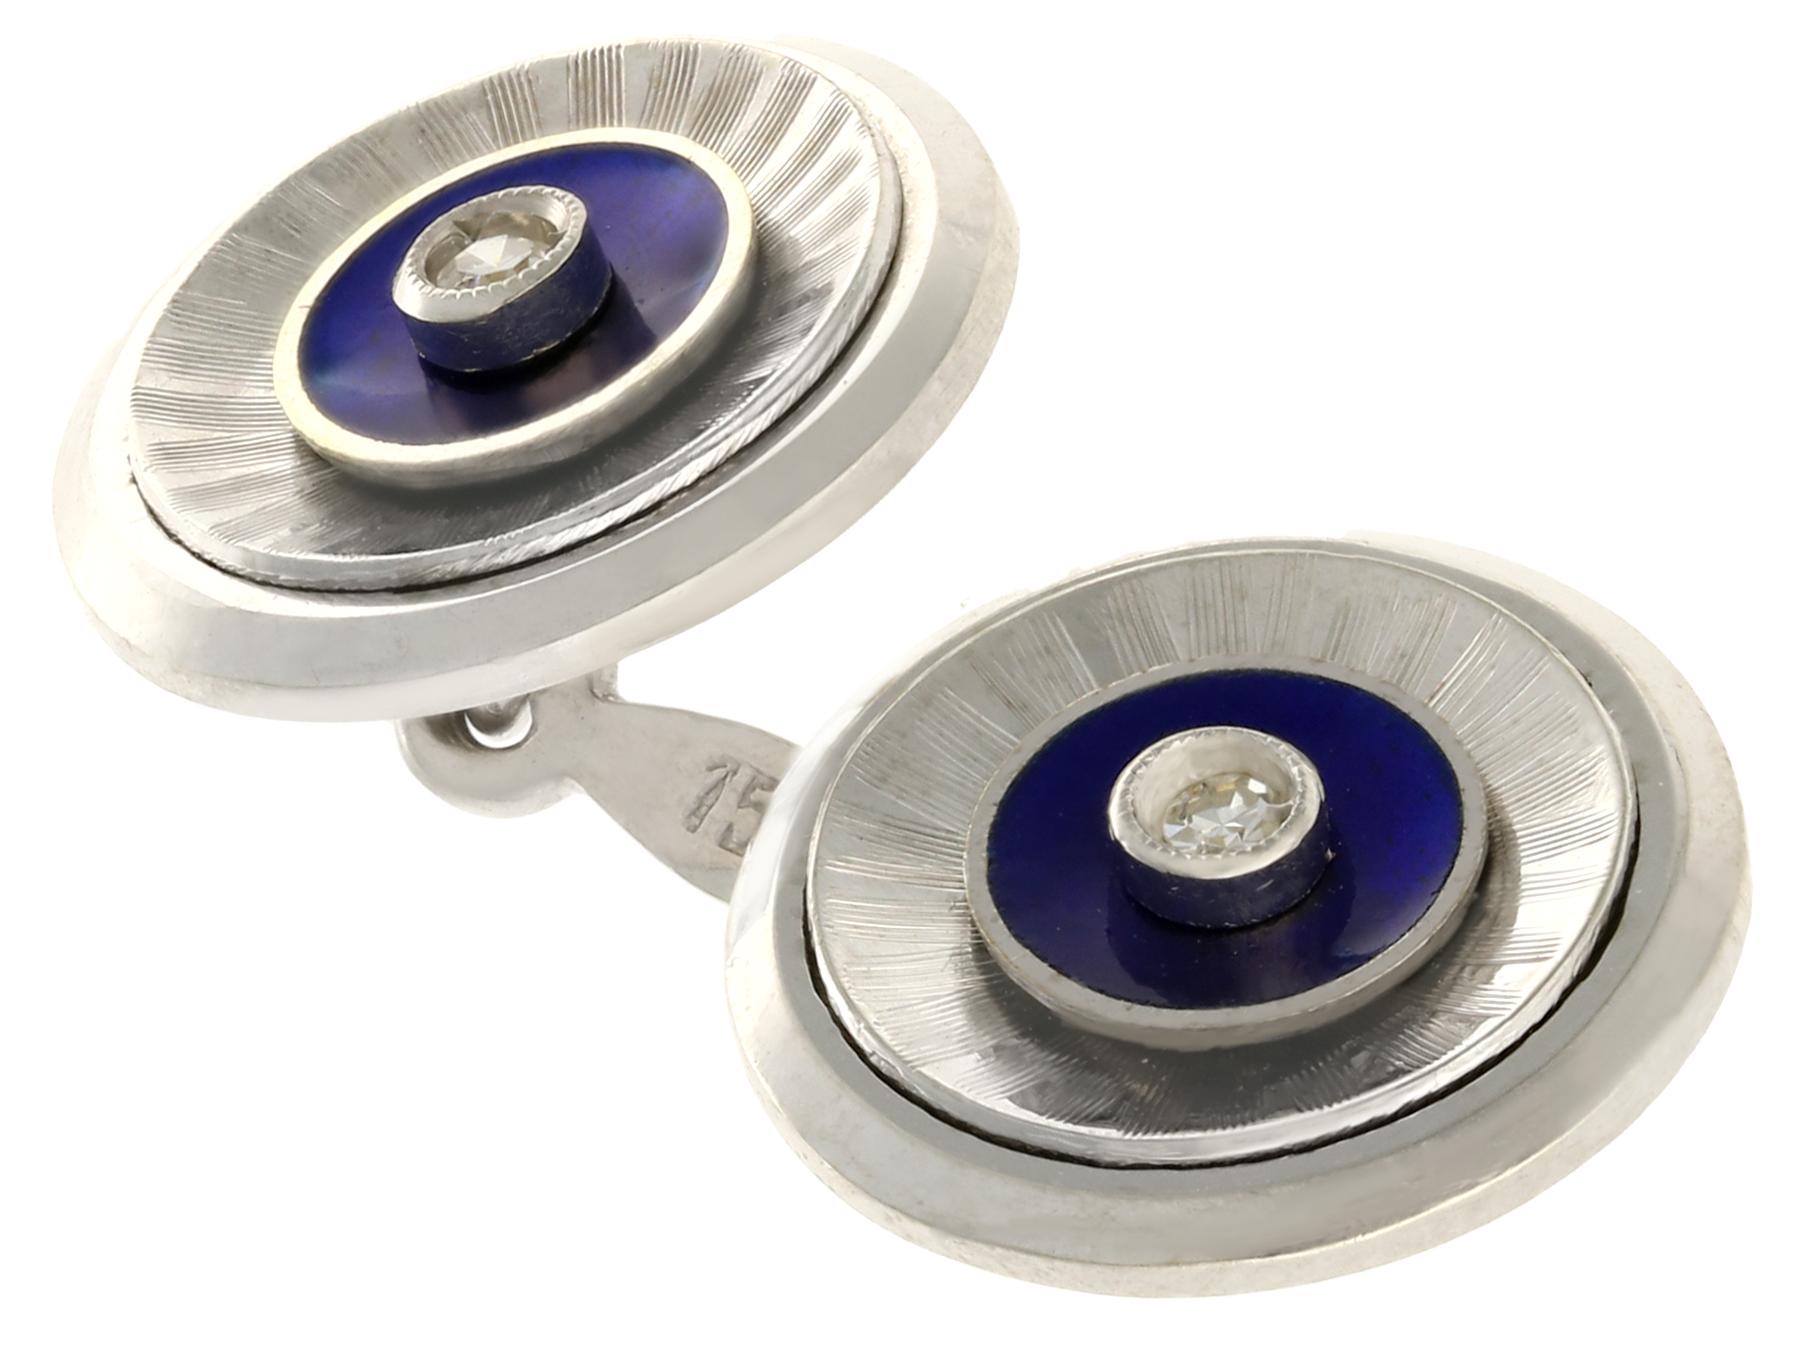 An impressive pair of antique 1920s 0.12 carat diamond and blue enamel, 18 karat white gold cufflinks; part of our diverse antique jewelry and estate jewelry collections.

These fine and impressive antique cufflinks have been crafted in 18k white